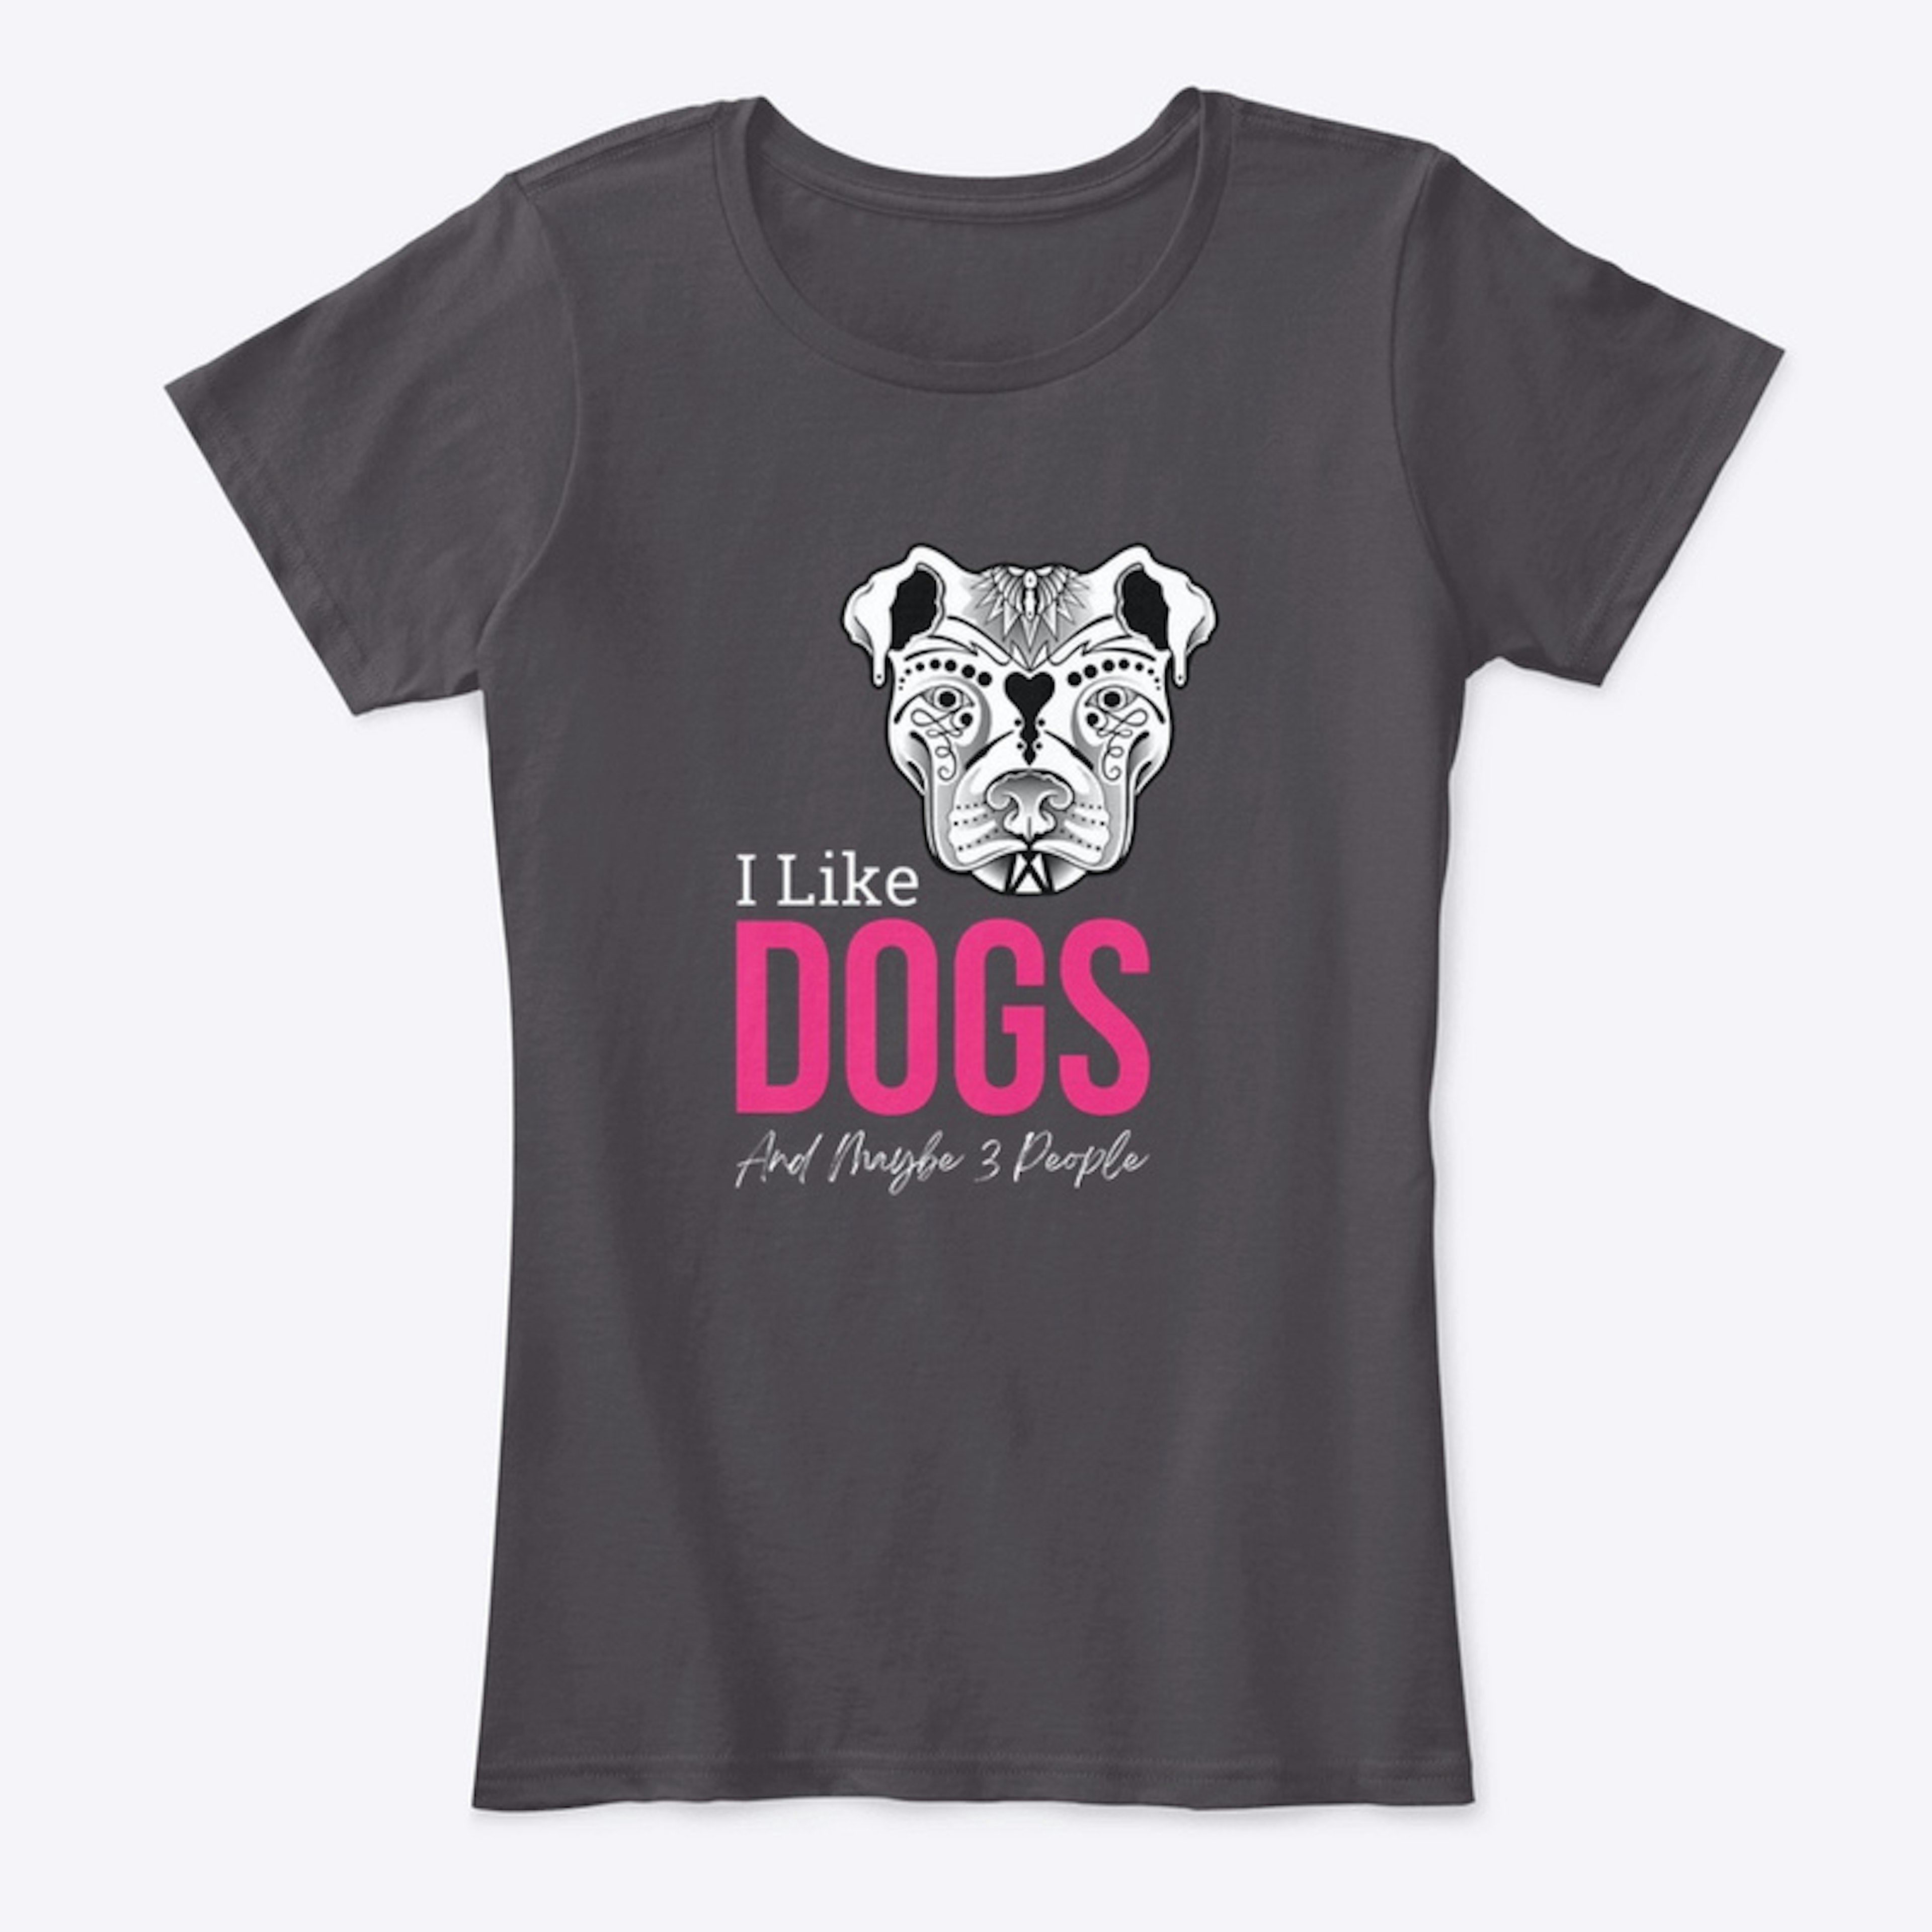 ODHS Dogs And Maybe 3 People T-shirt